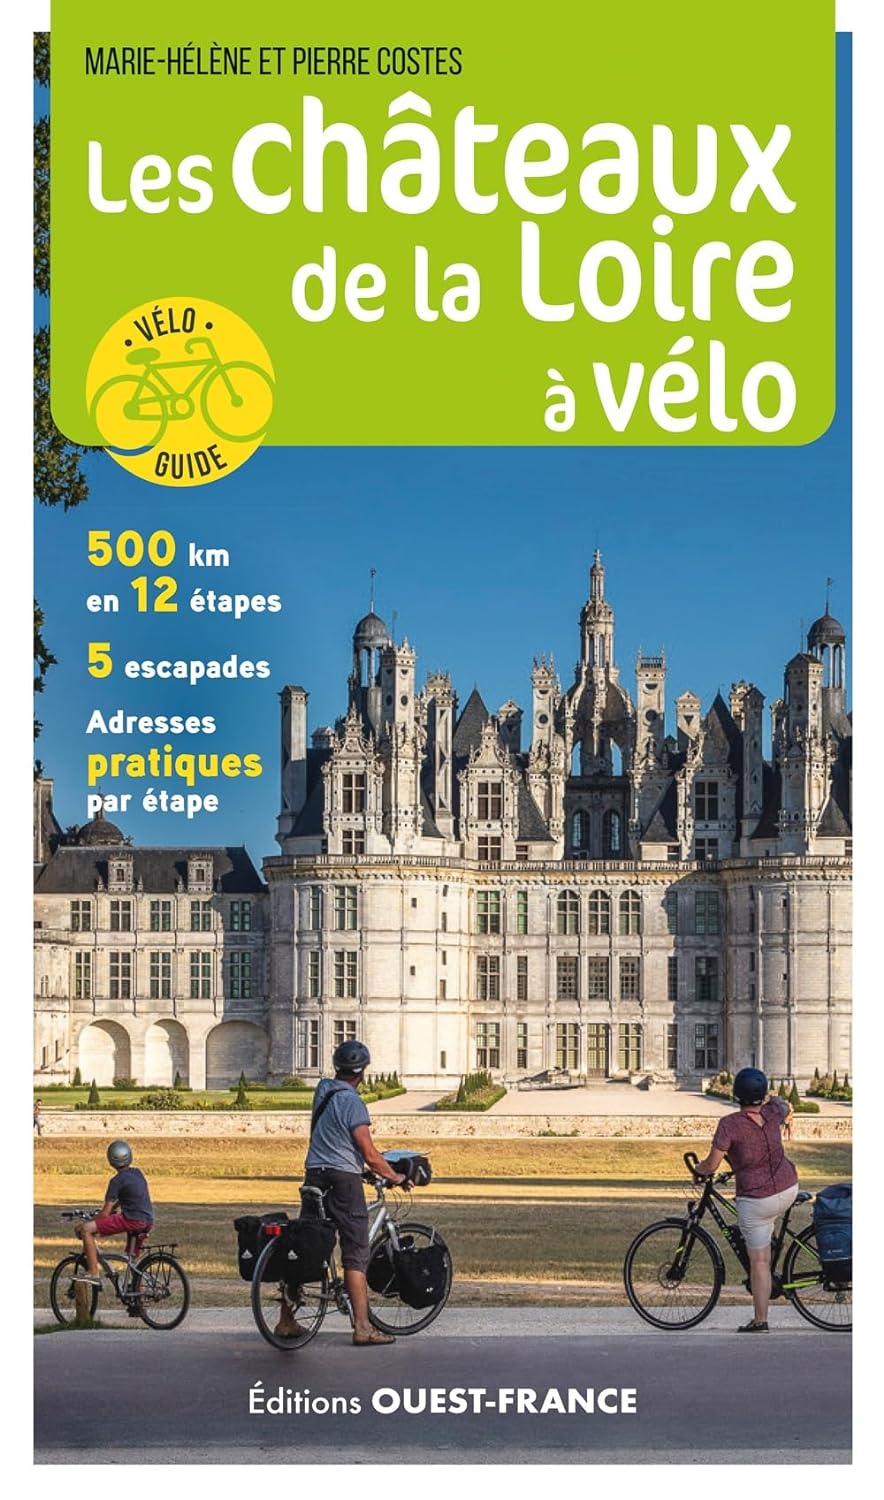 Cycling guide - The Loire castles by bike | West France